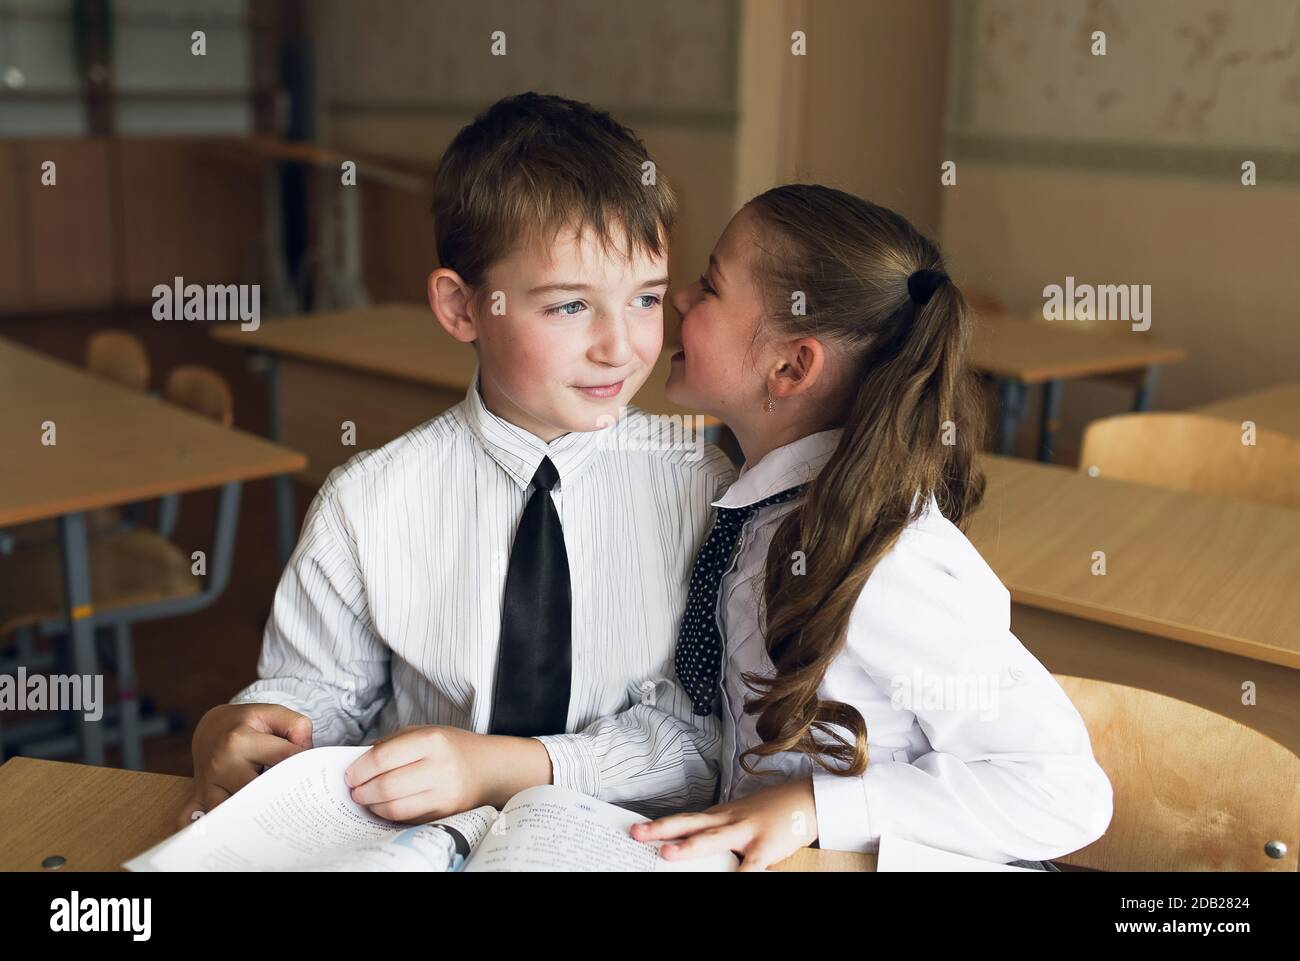 a boy and a girl students sit at a Desk and talk in each other's ear Stock Photo